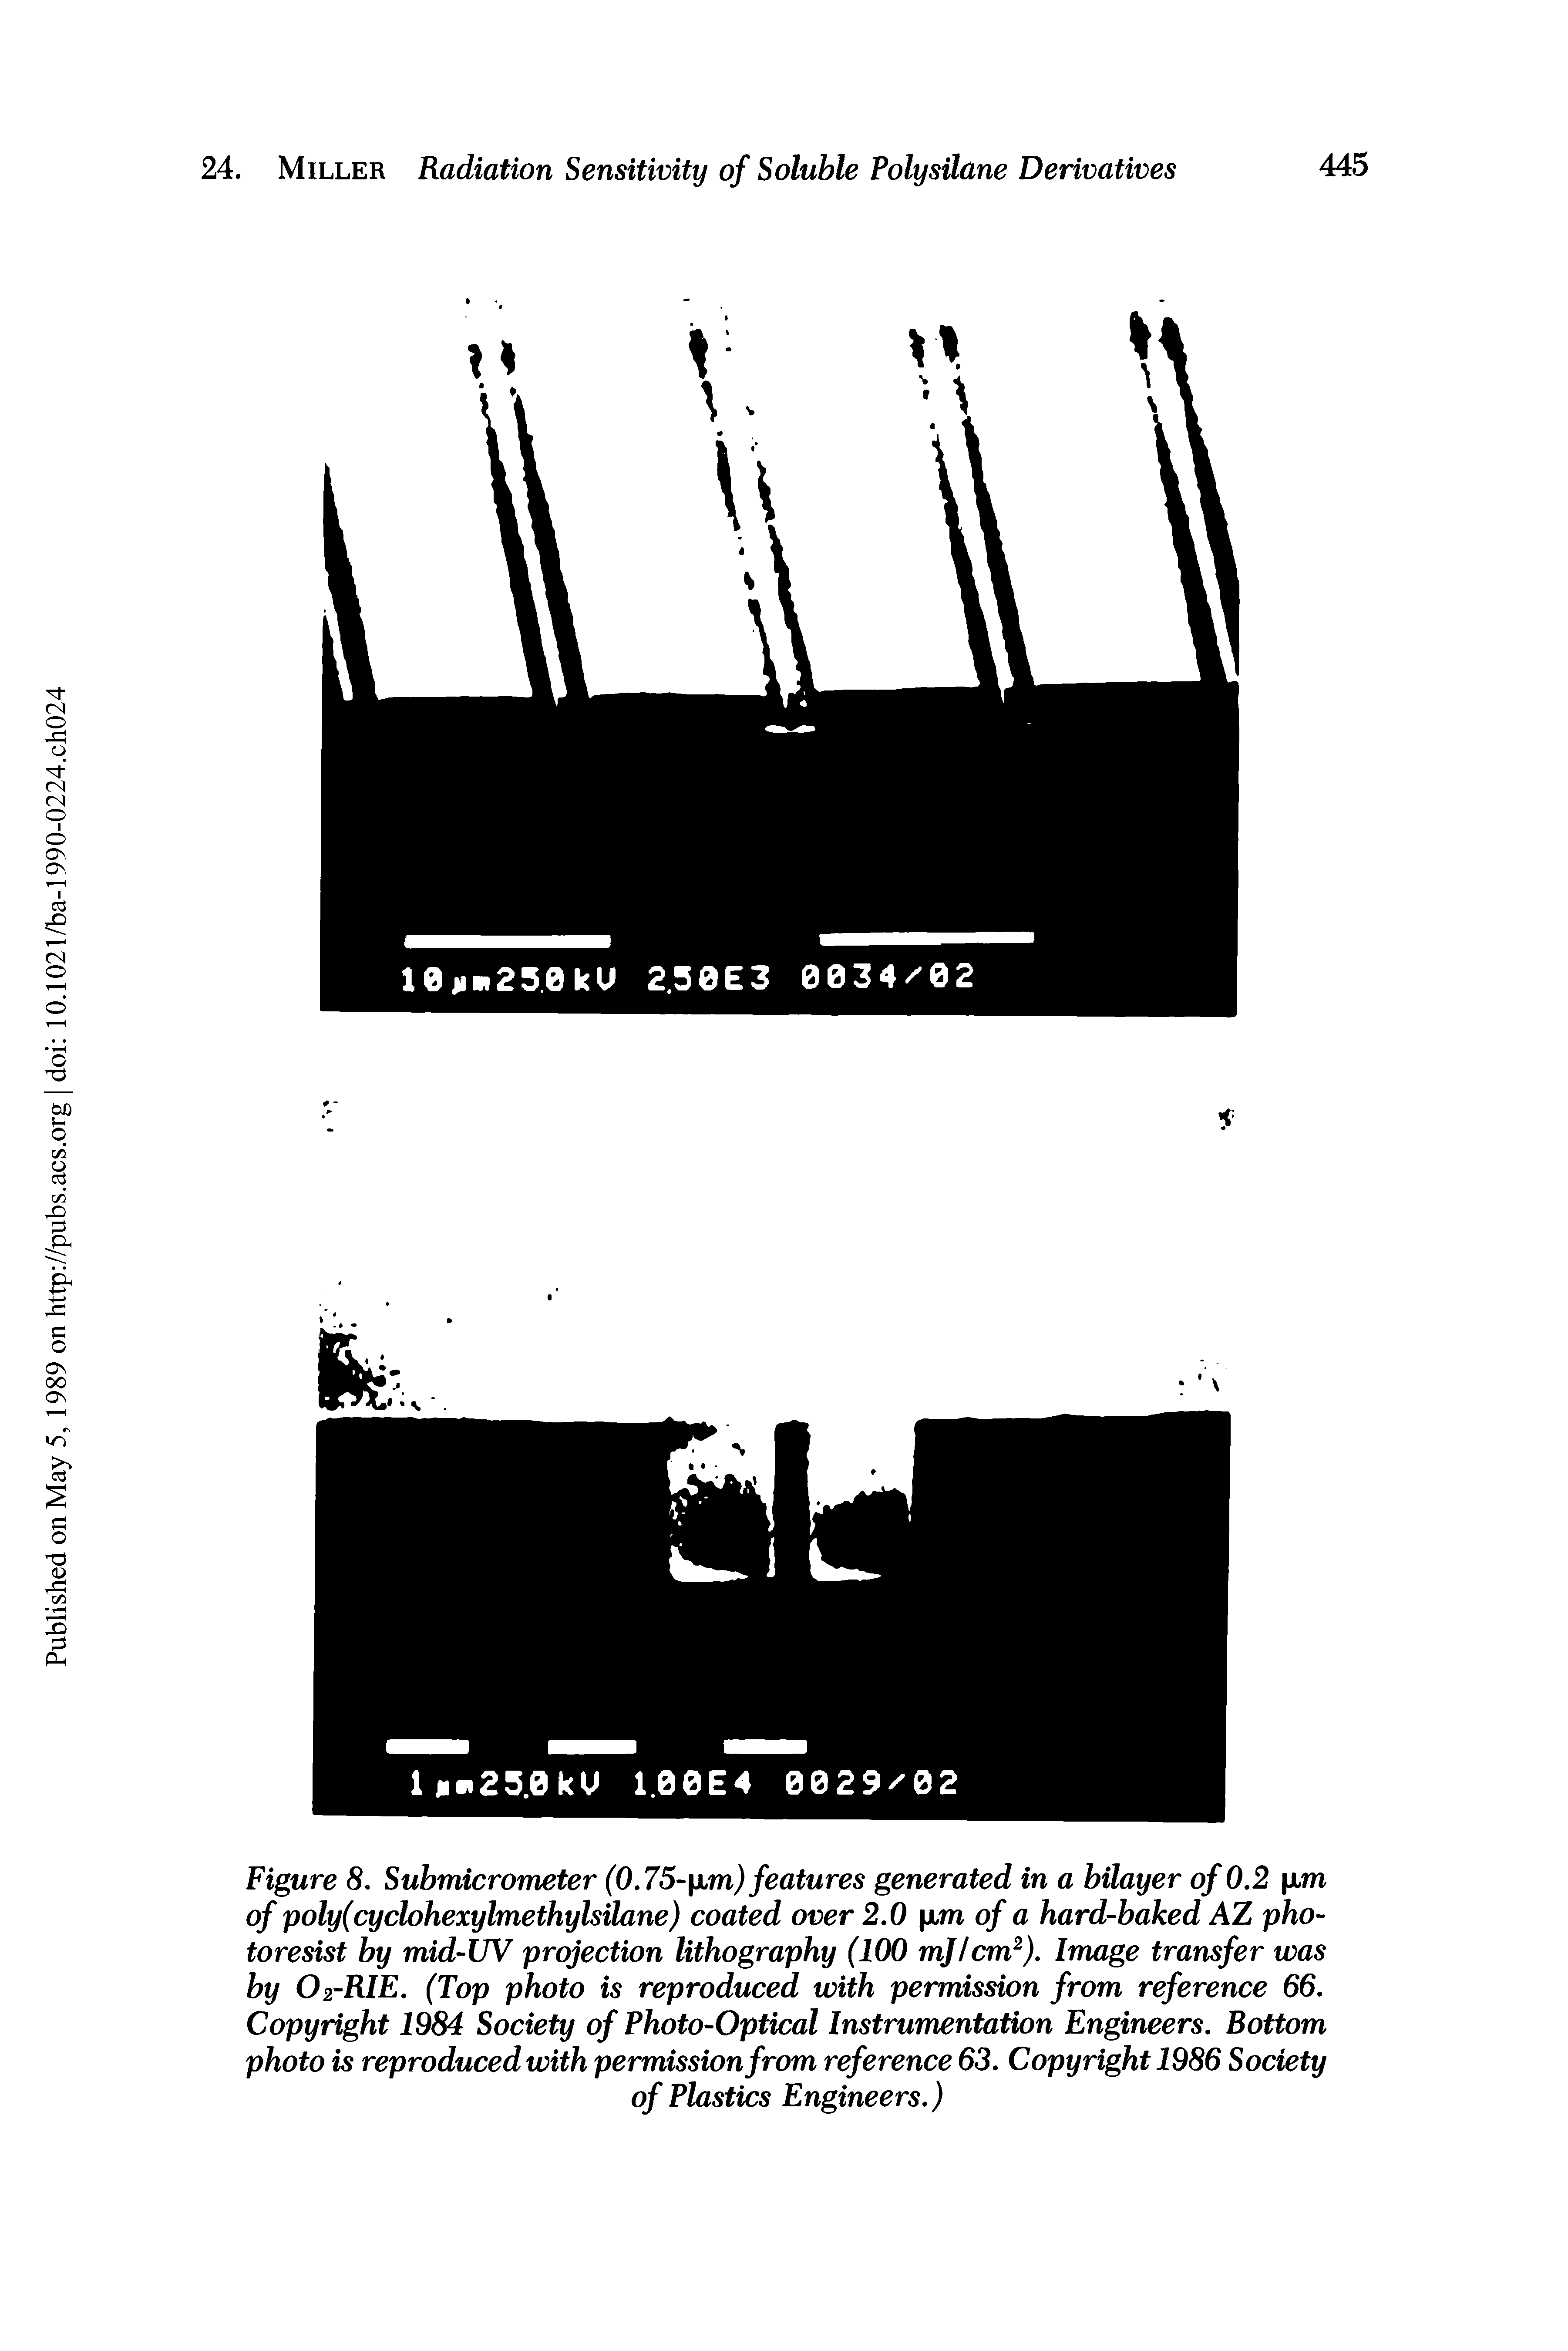 Figure 8. Submicrometer (0.75- ym) features generated in a bilayer of 0,2 fim of poly(cyclohexylmethylsilane) coated over 2.0 xm of a hard-baked AZ photoresist by mid-UV projection lithography (100 mjlcm ). Image transfer was by O2-RIE. (Top photo is reproduced with permission from reference 66. Copyright 1984 Society of Photo-Optical Instrumentation Engineers. Bottom photo is reproduced with permission from reference 63. Copyright 1986 Society of Plastics Engineers.)...